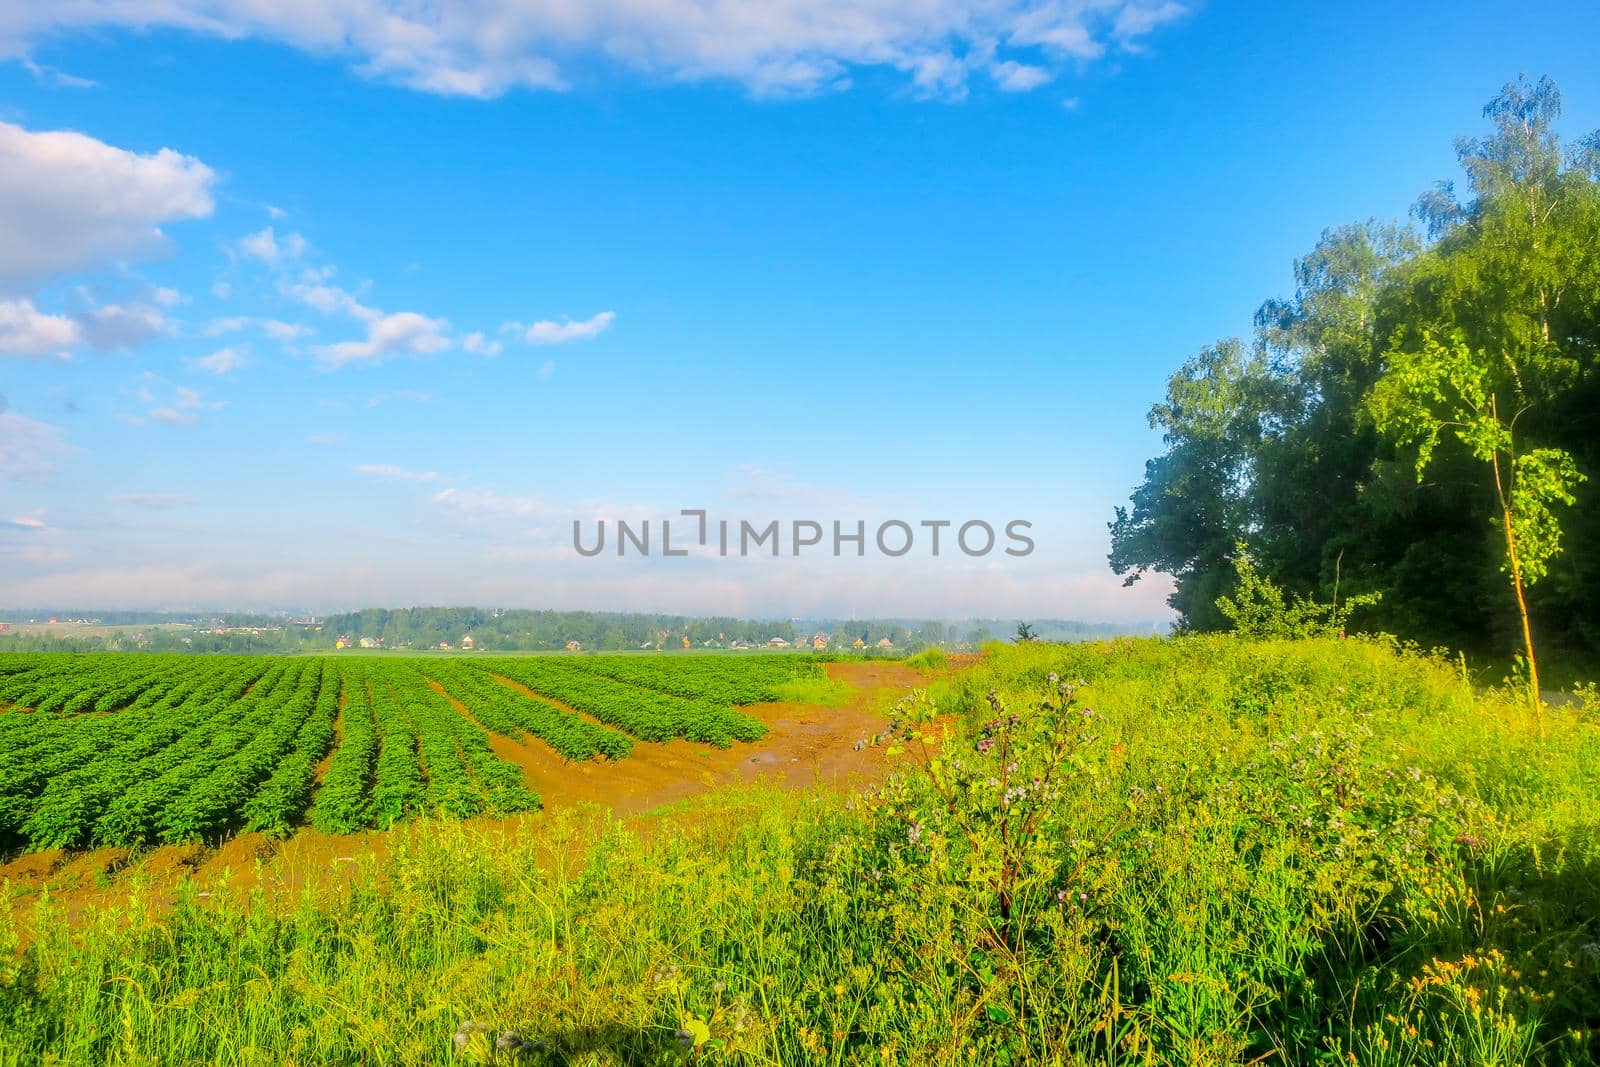 Green crops growing in straight rows in the agricultural field, the landscape in the spring or early summer.